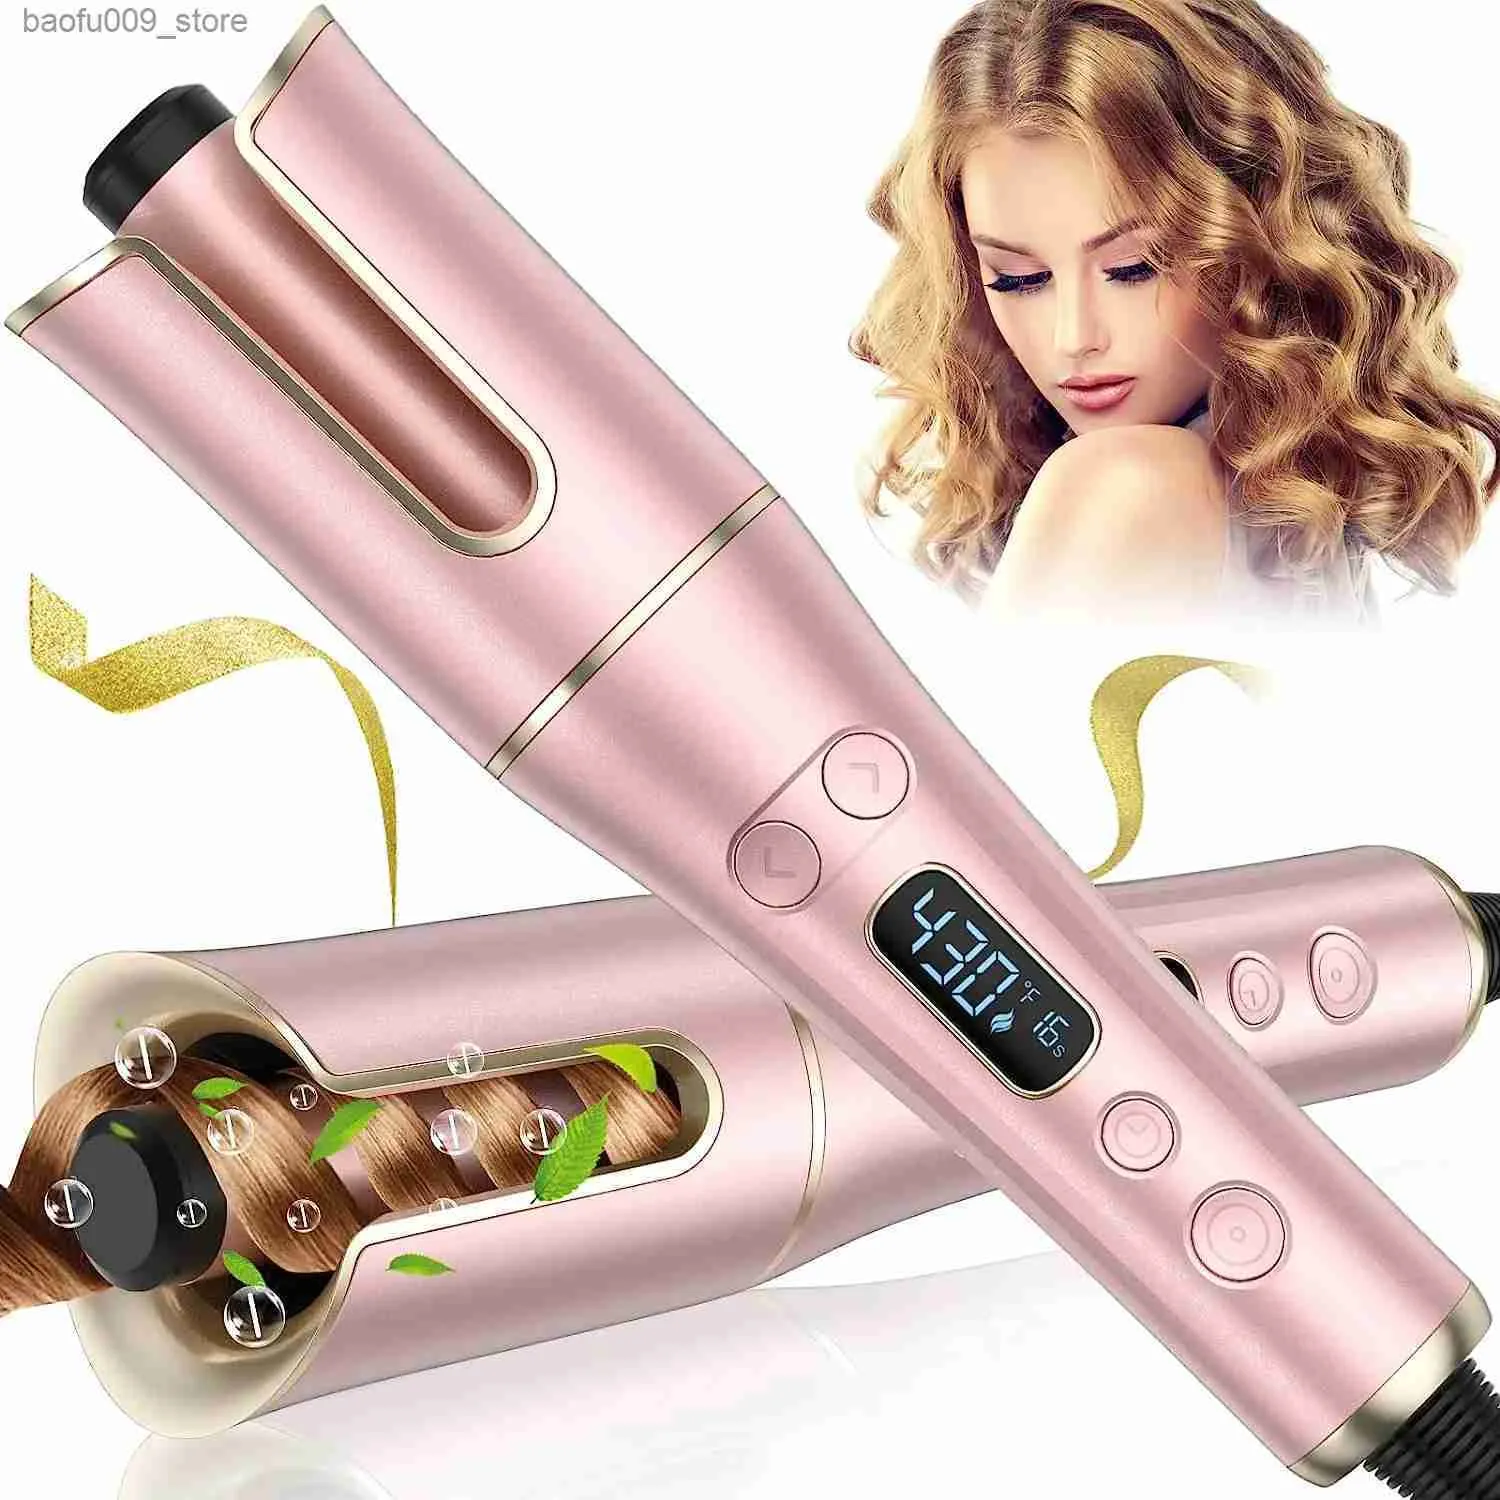 Curling Irons Automatic curling iron bar with 4 temperatures and 3 timers LCD display for curling iron dual voltage hairstyle Q240425